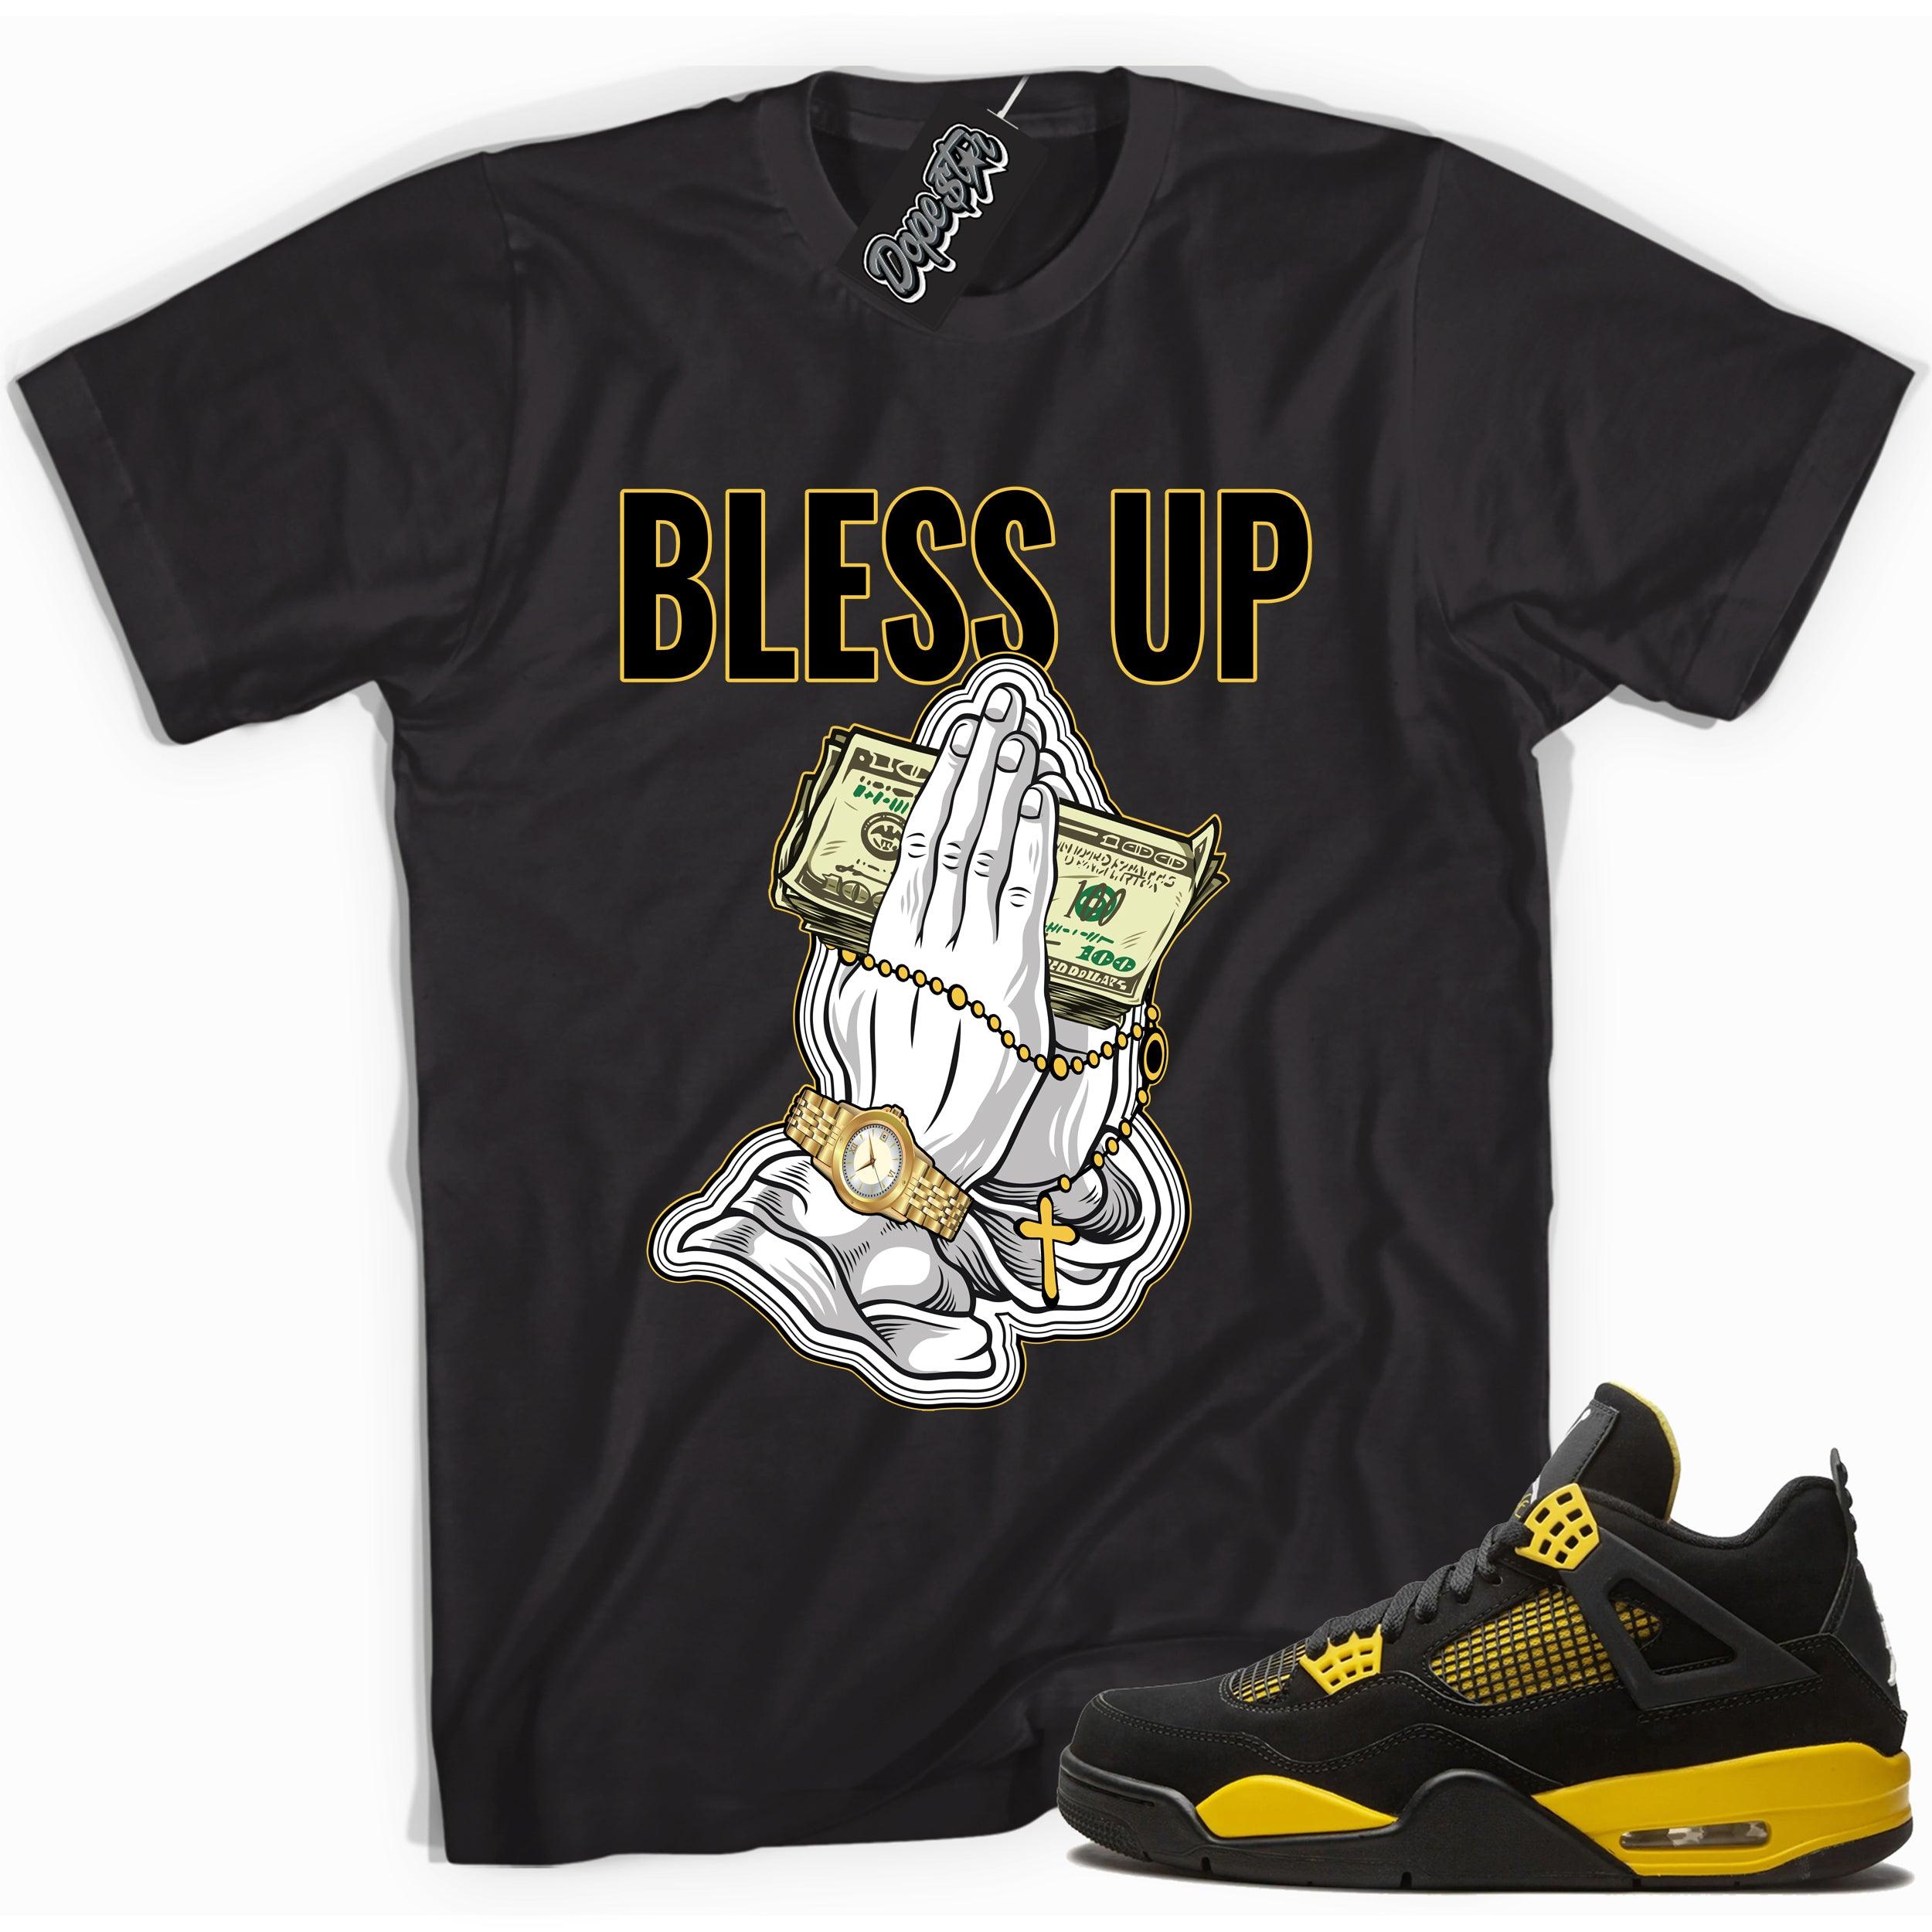 Cool black graphic tee with 'bless up' print, that perfectly matches  Air Jordan 4 Thunder sneakers